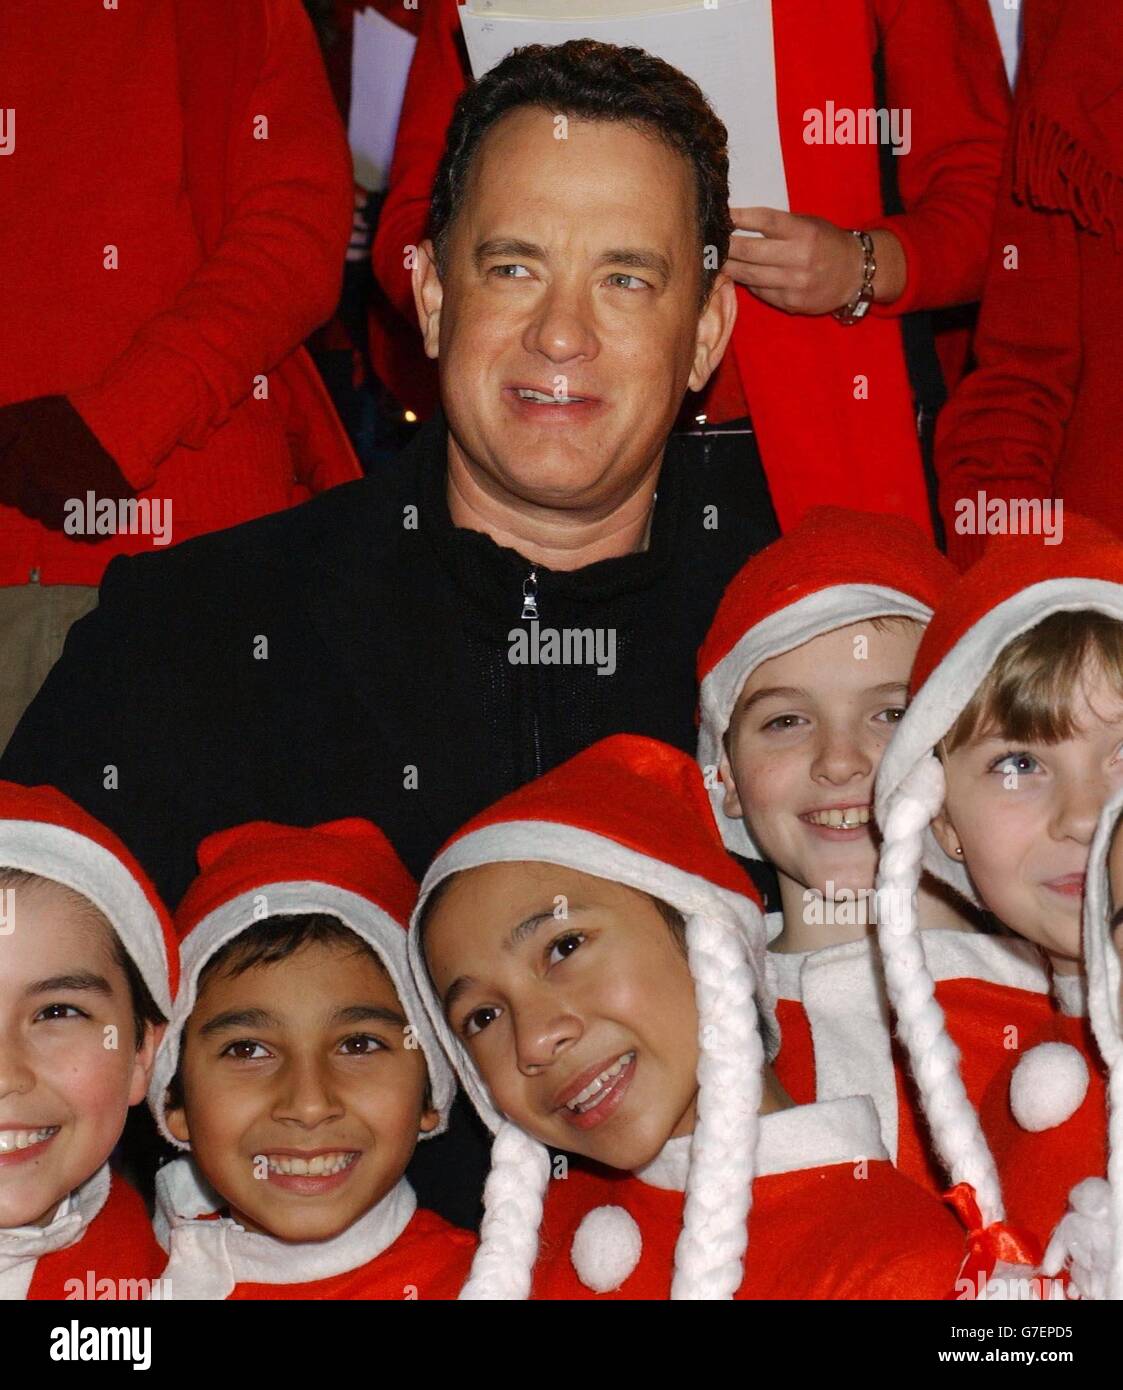 Star of the film Tom Hanks poses with school children as he arrives for the UK premiere of Polar Express, at the Vue Leicester Square in central London. Stock Photo